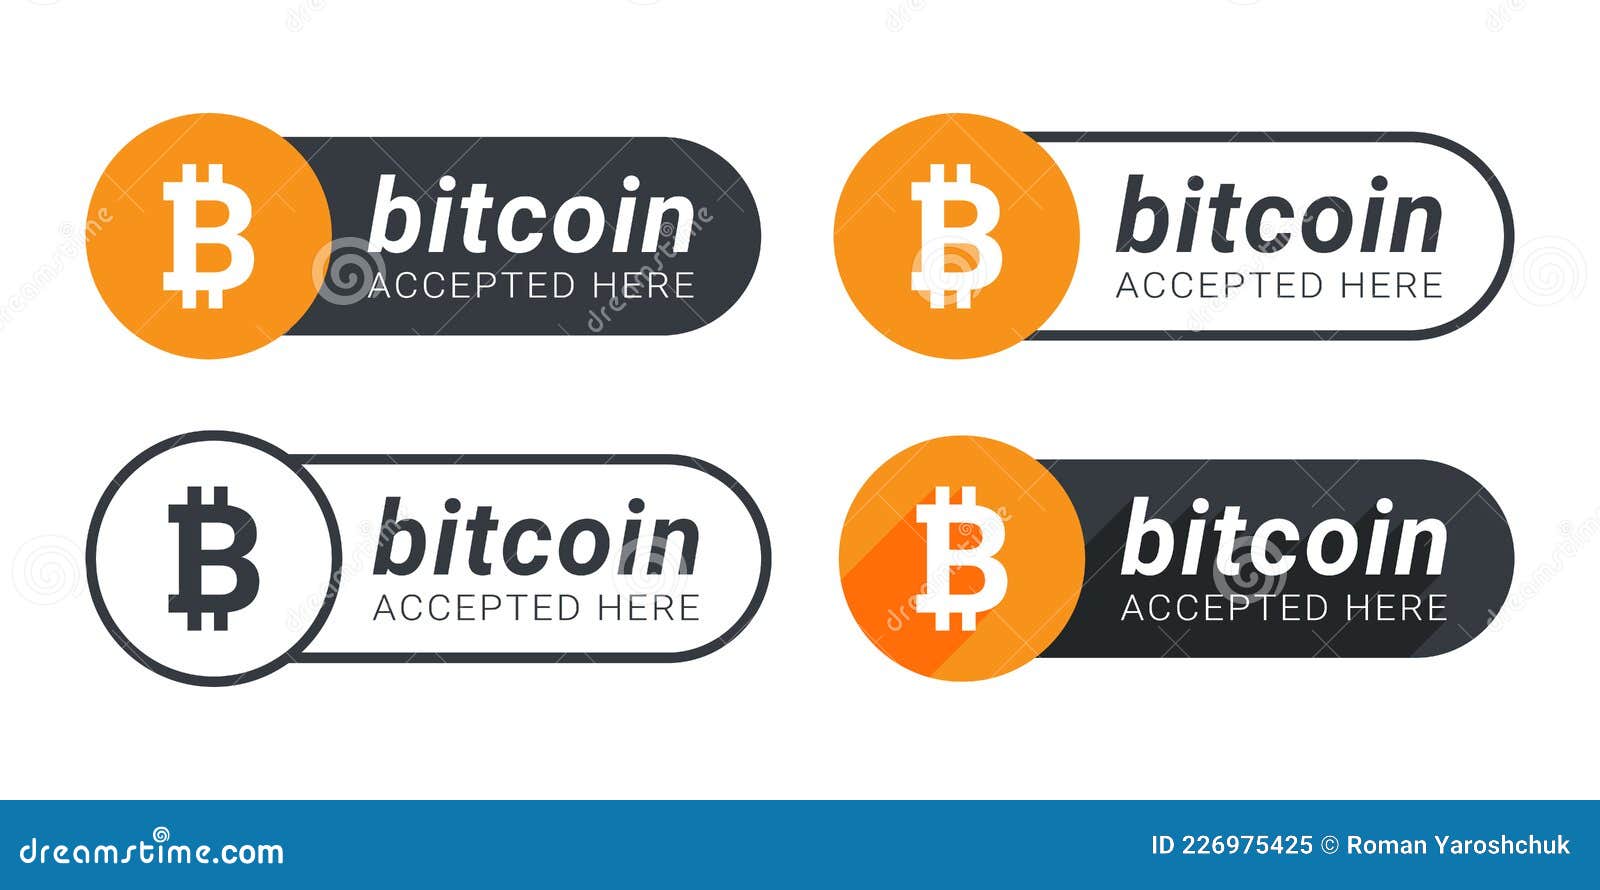 where are bitcoin accepted